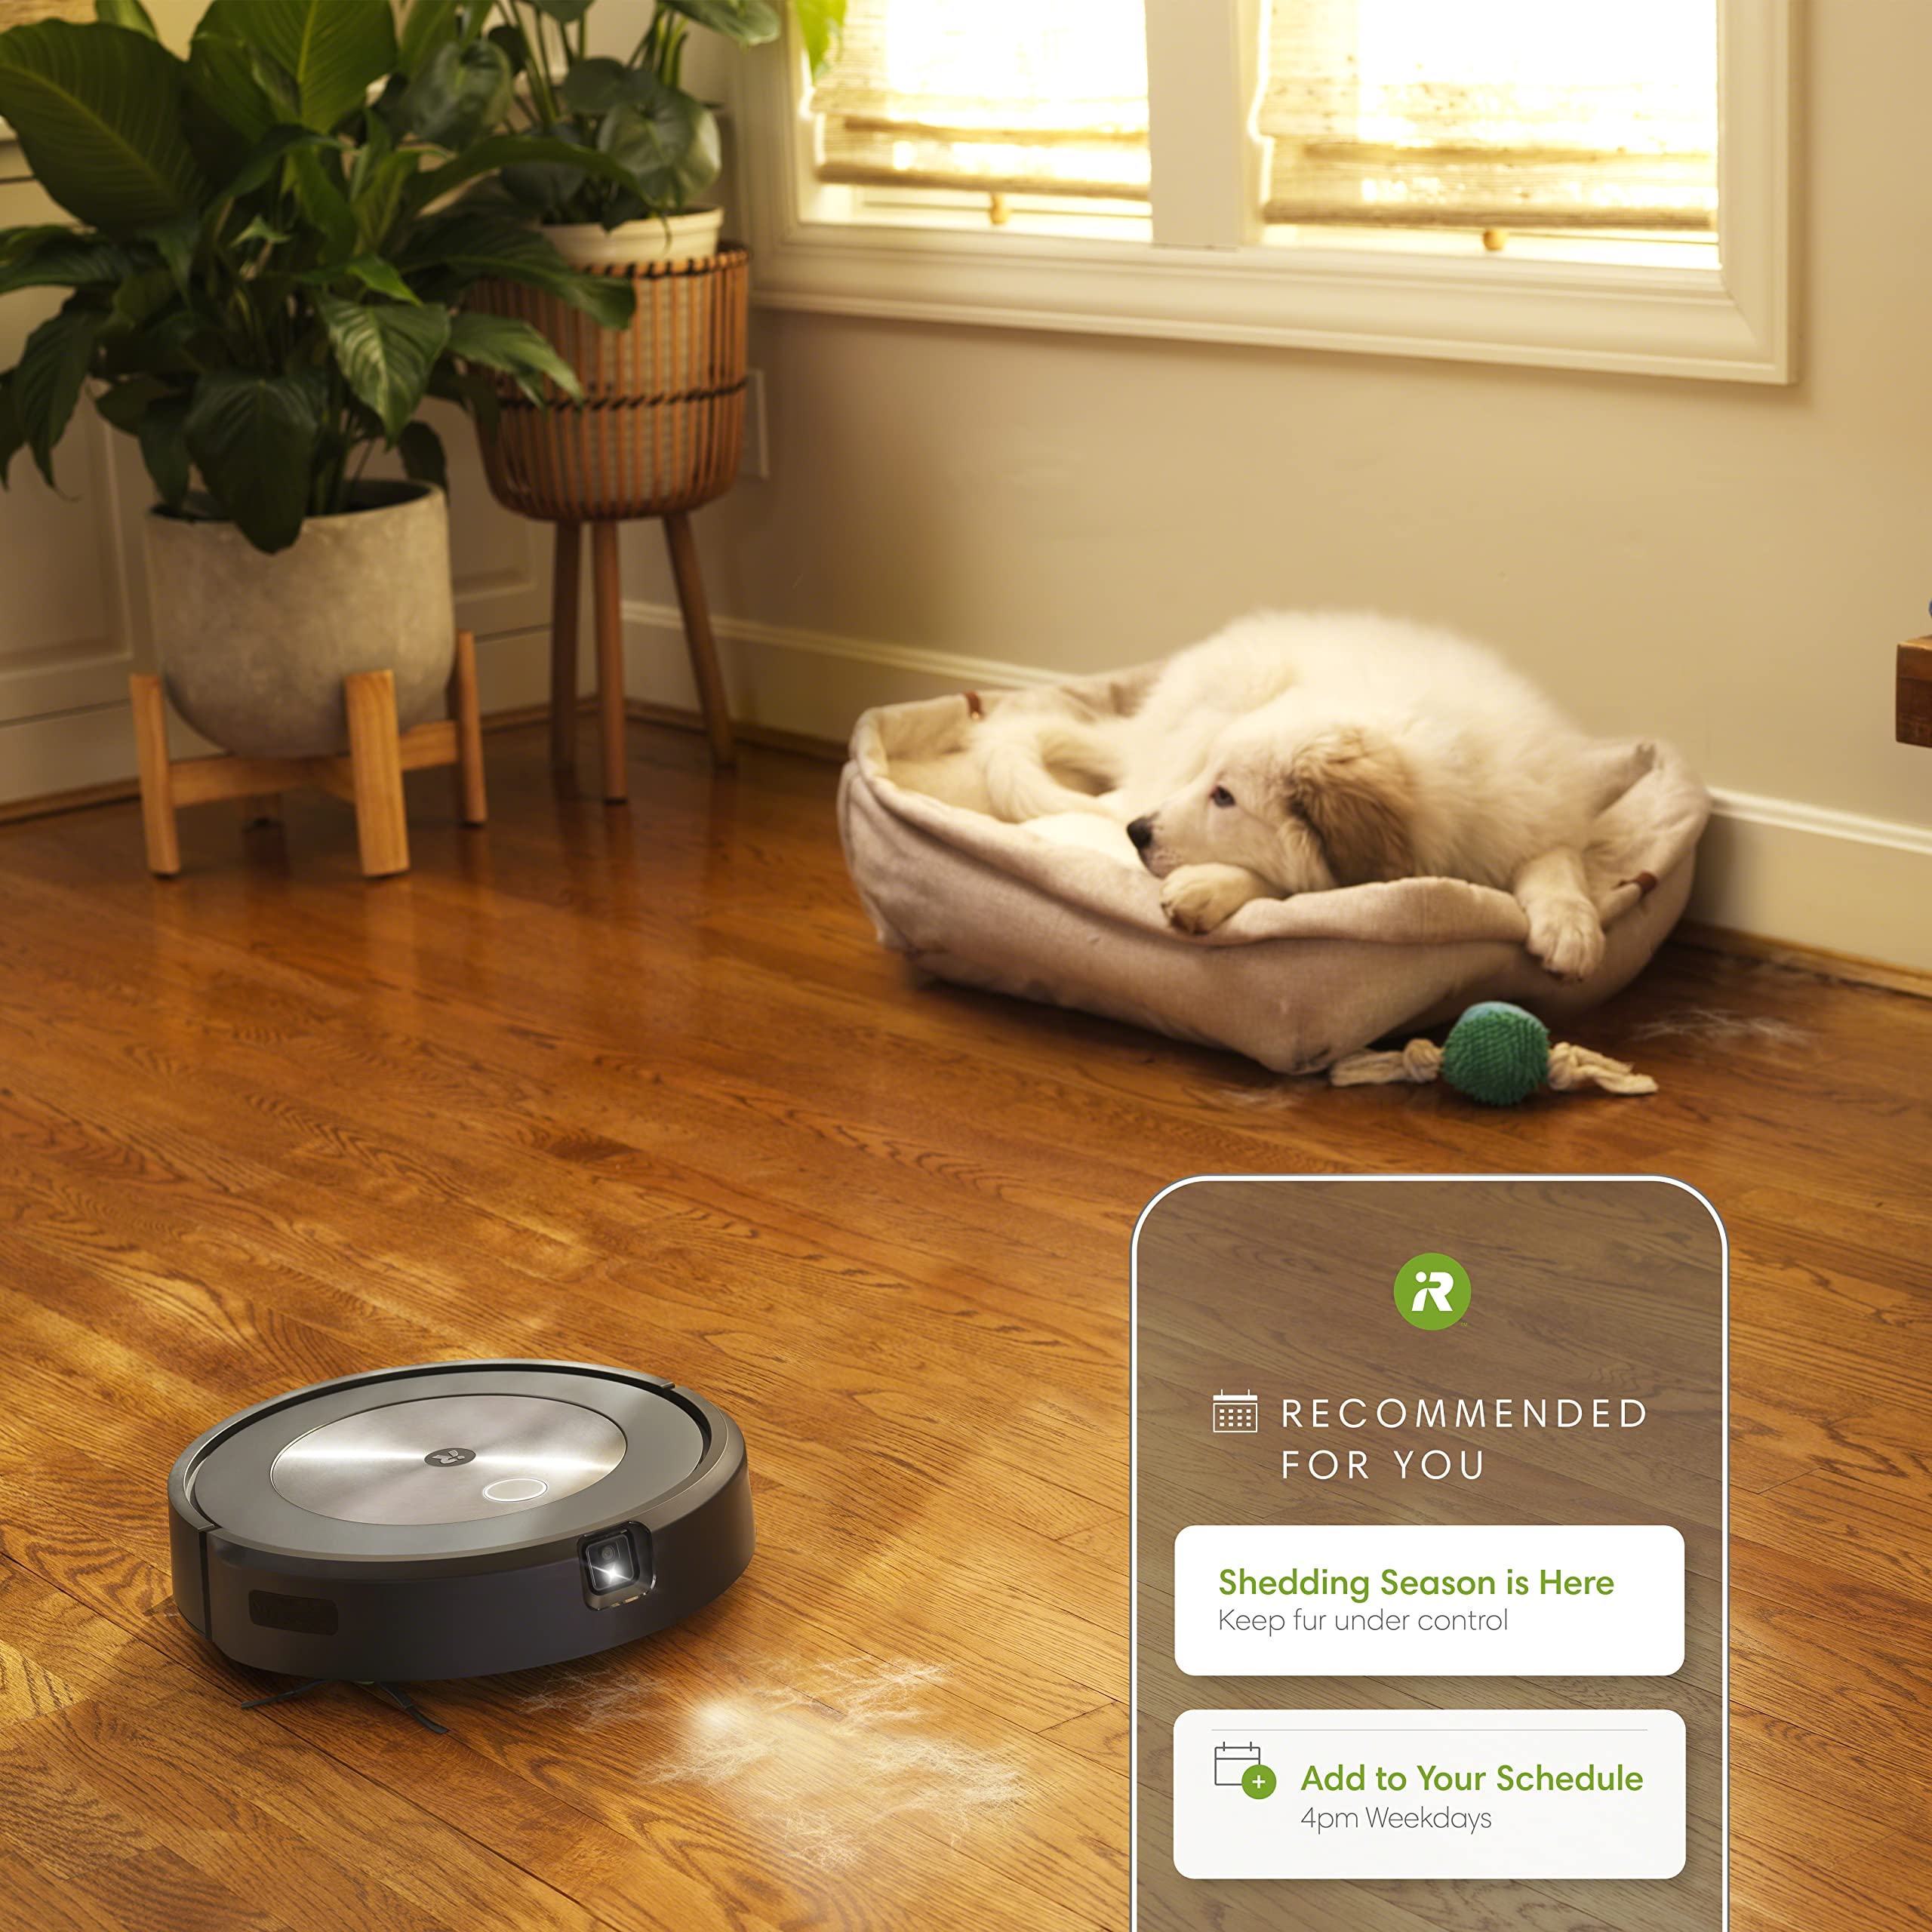 Mua iRobot Roomba j7+ (7550) Self-Emptying Robot Vacuum – Identifies and  avoids obstacles like pet waste & cords, Empties itself for 60 days, Smart  Mapping, Works with Alexa, Ideal for Pet Hair,